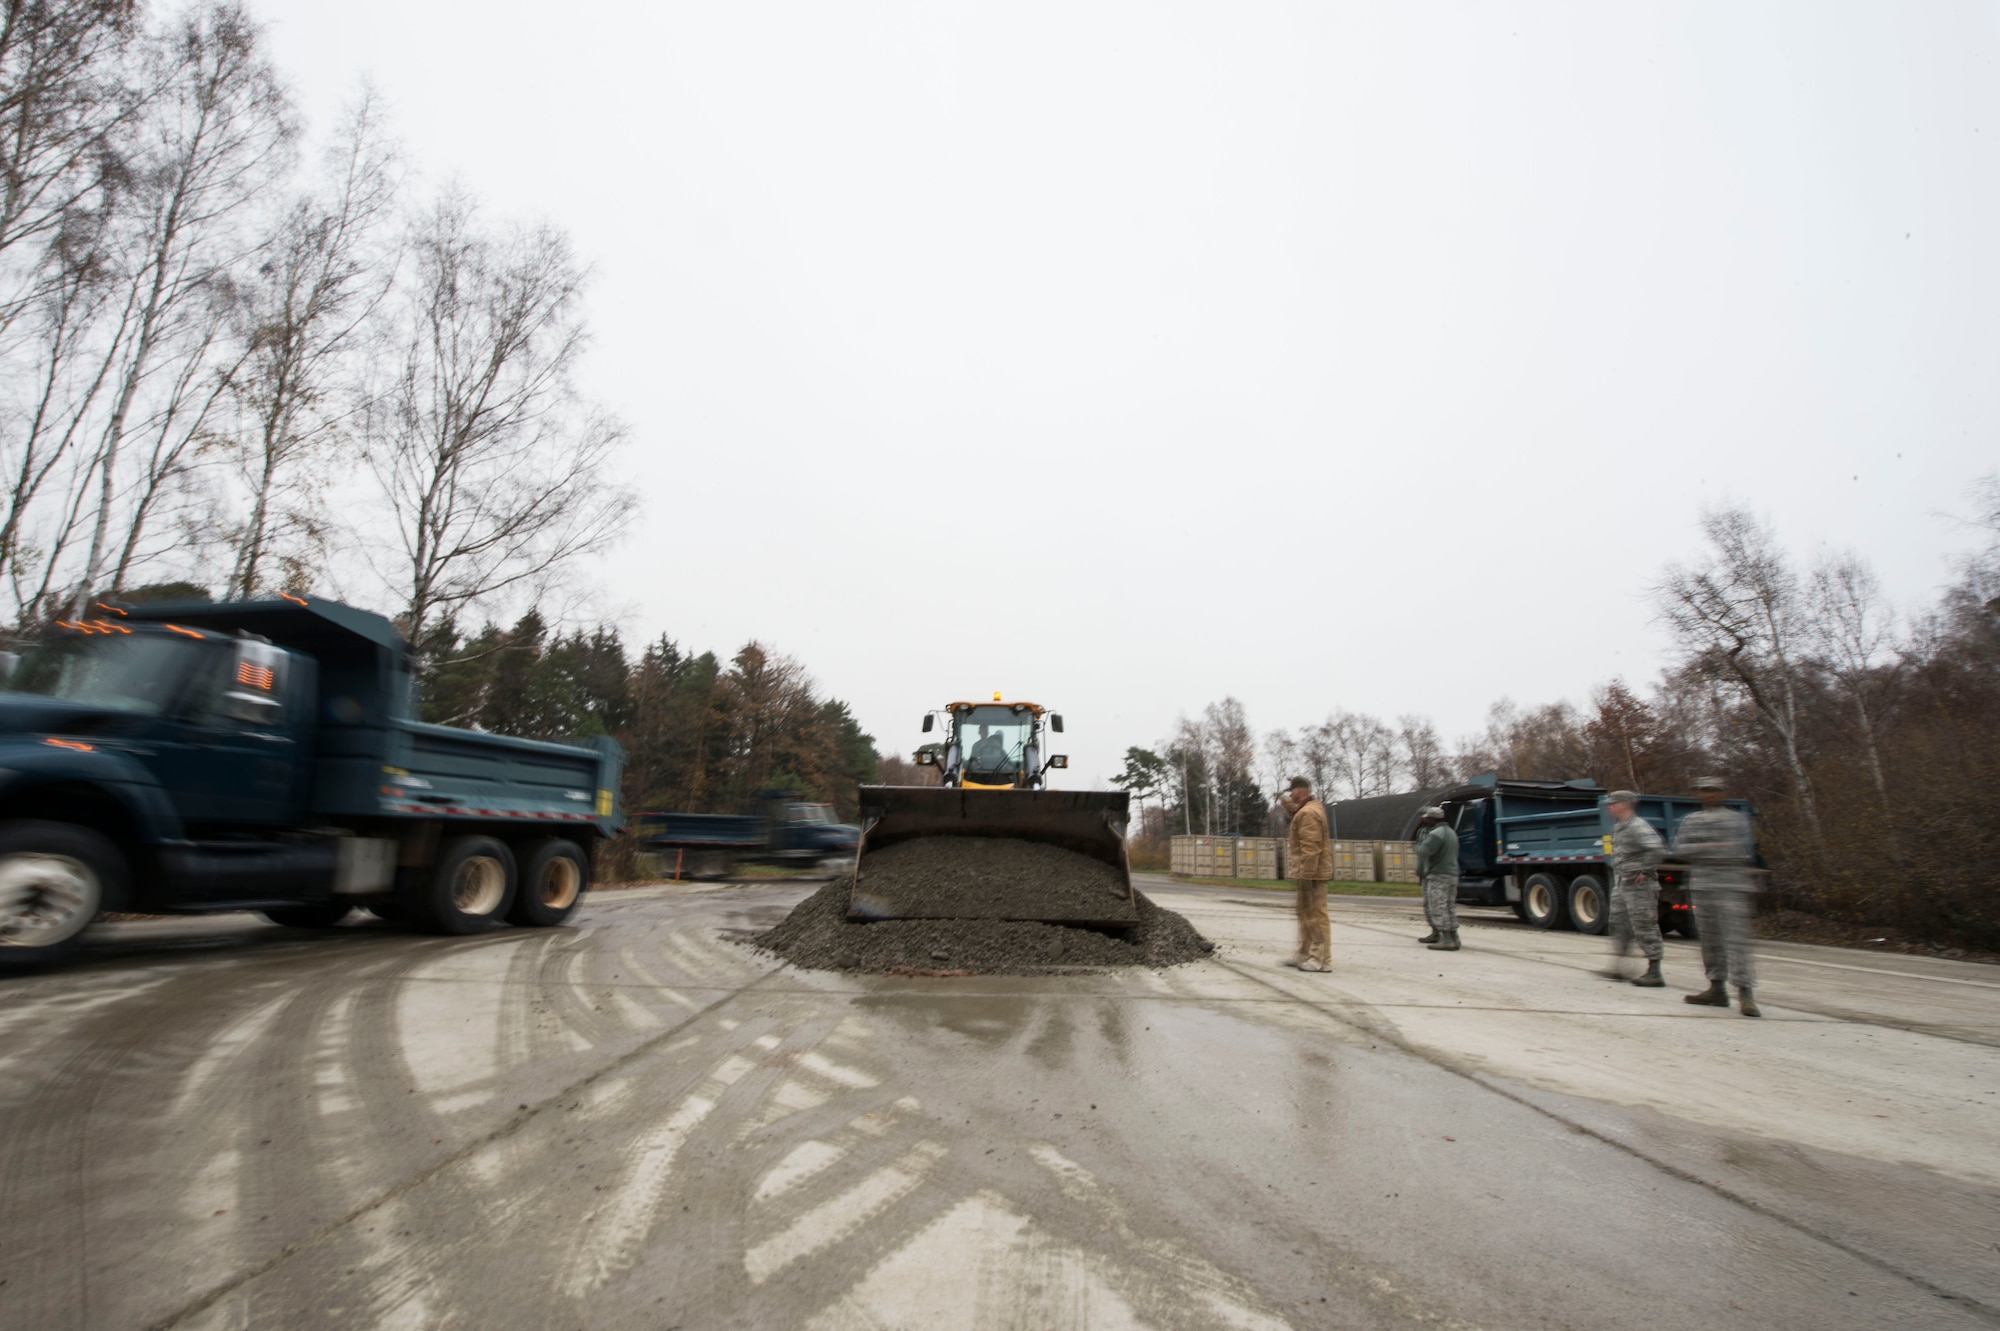 U.S. Airmen assigned to the 786th Civil Engineer Squadron move a gravel pile as part of a training event on Ramstein Air Base, Germany, Nov. 15, 2018. Leaders at the 786th CES bolstered their squadron’s Prime Base Engineer Emergency Force readiness with assistance from instructors assigned to the 435th Construction and Training Squadron. (U.S. Air Force photo by Senior Airman Joshua Magbanua)